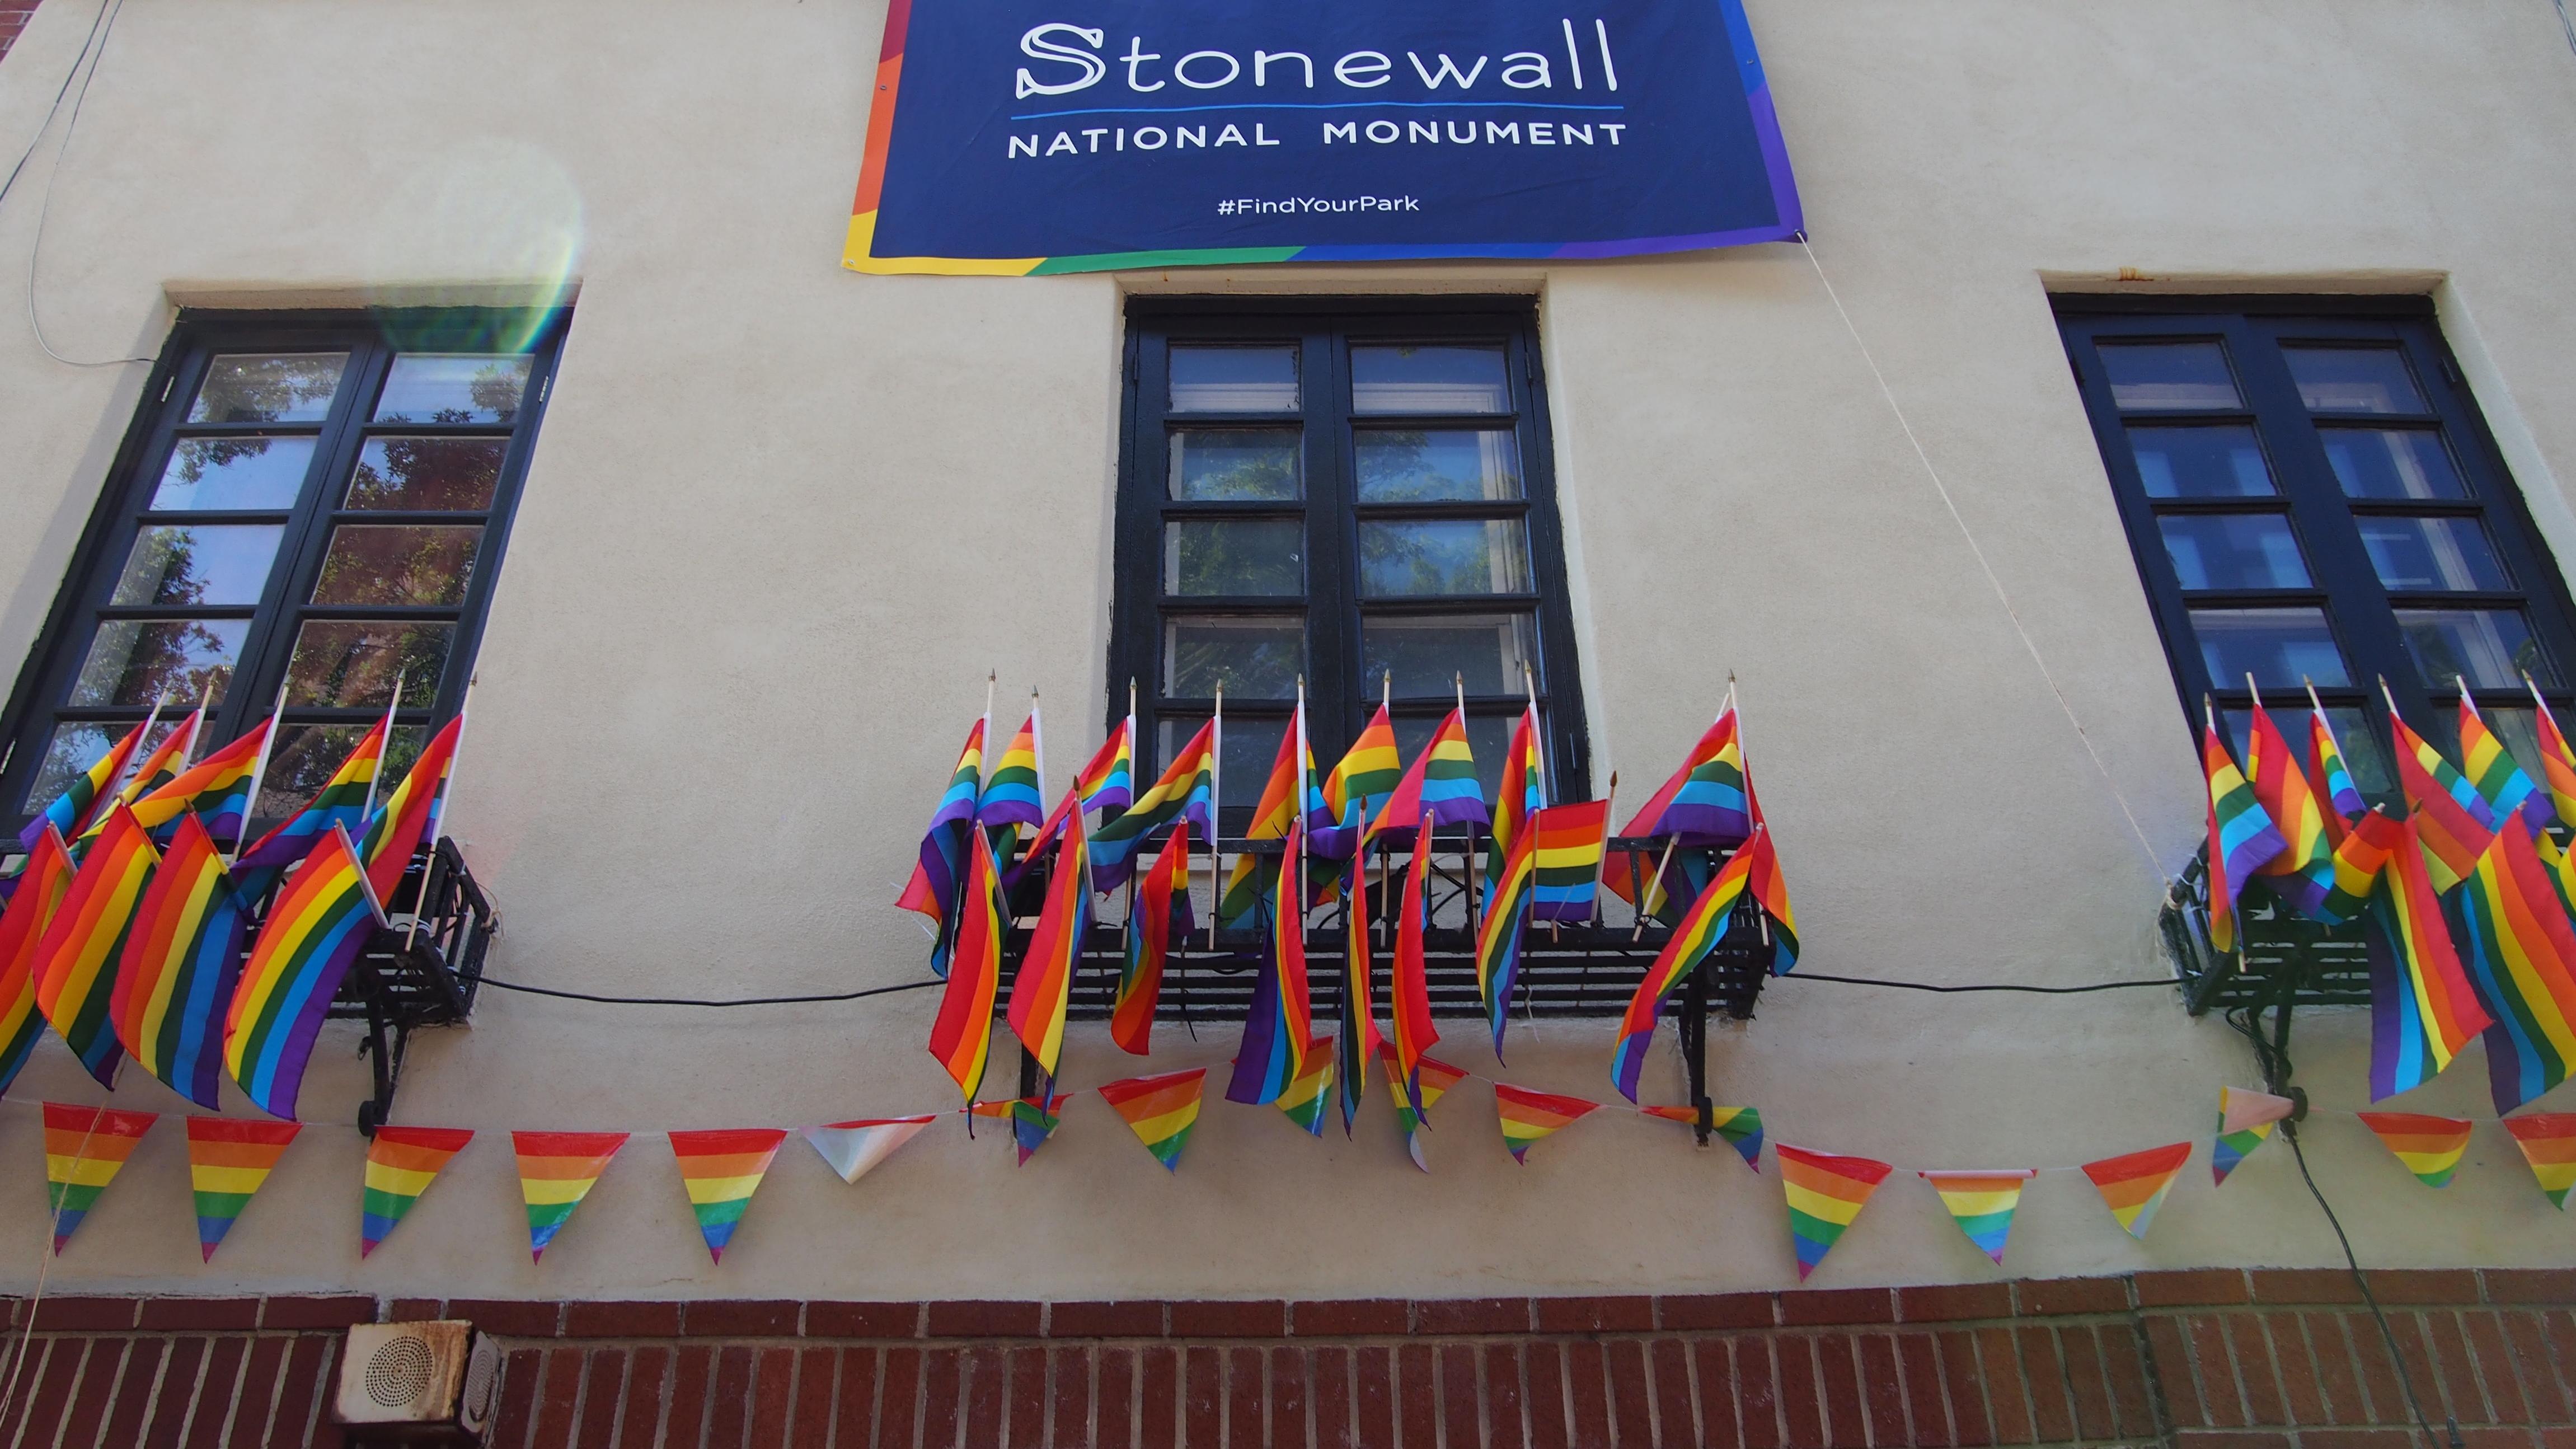 The Stonewall National Monument on June 25, 2016, the day after its declaration as a national monument by President Barack Obama